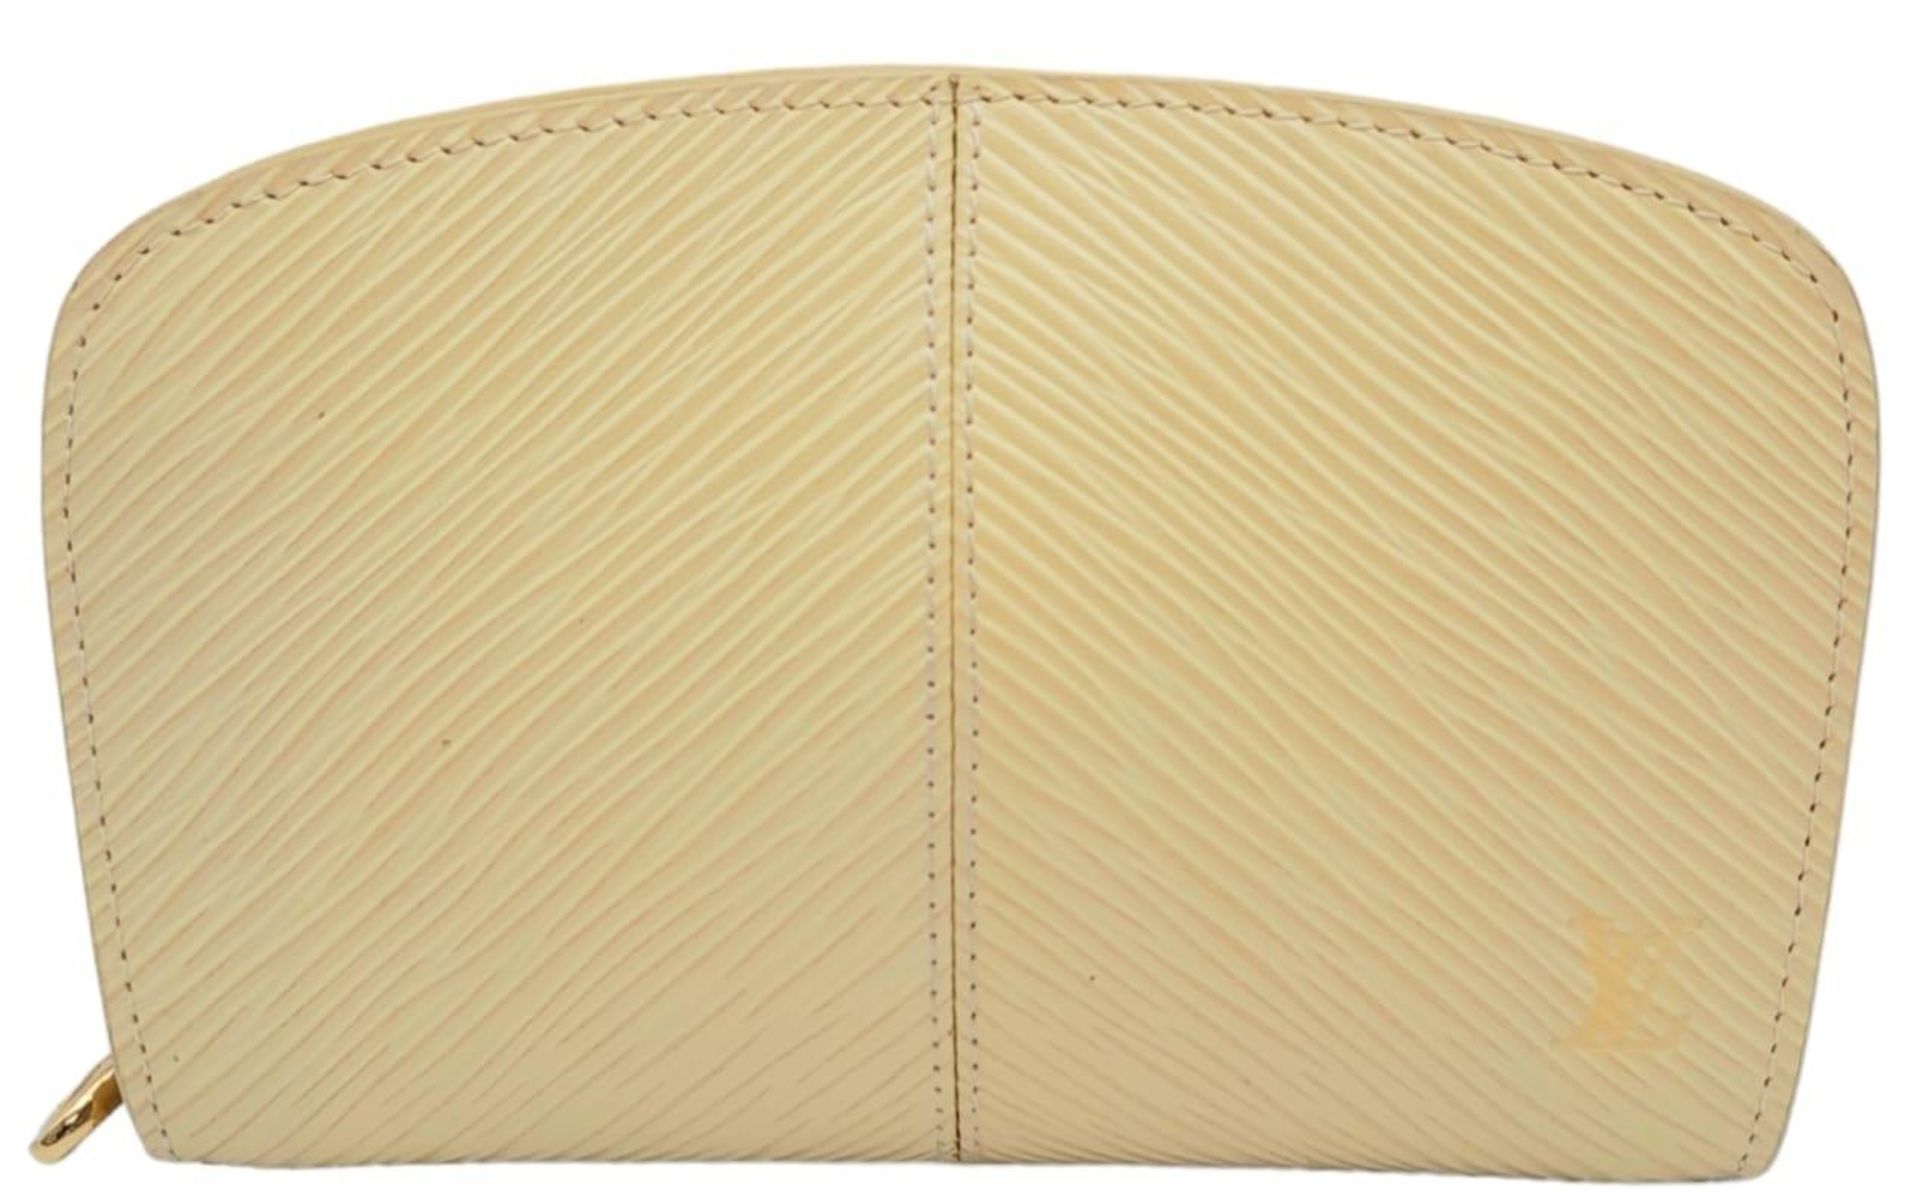 A Louis Vuitton Vanilla Wallet. Epi leather exterior gold-toned hardware and zipped top closure.